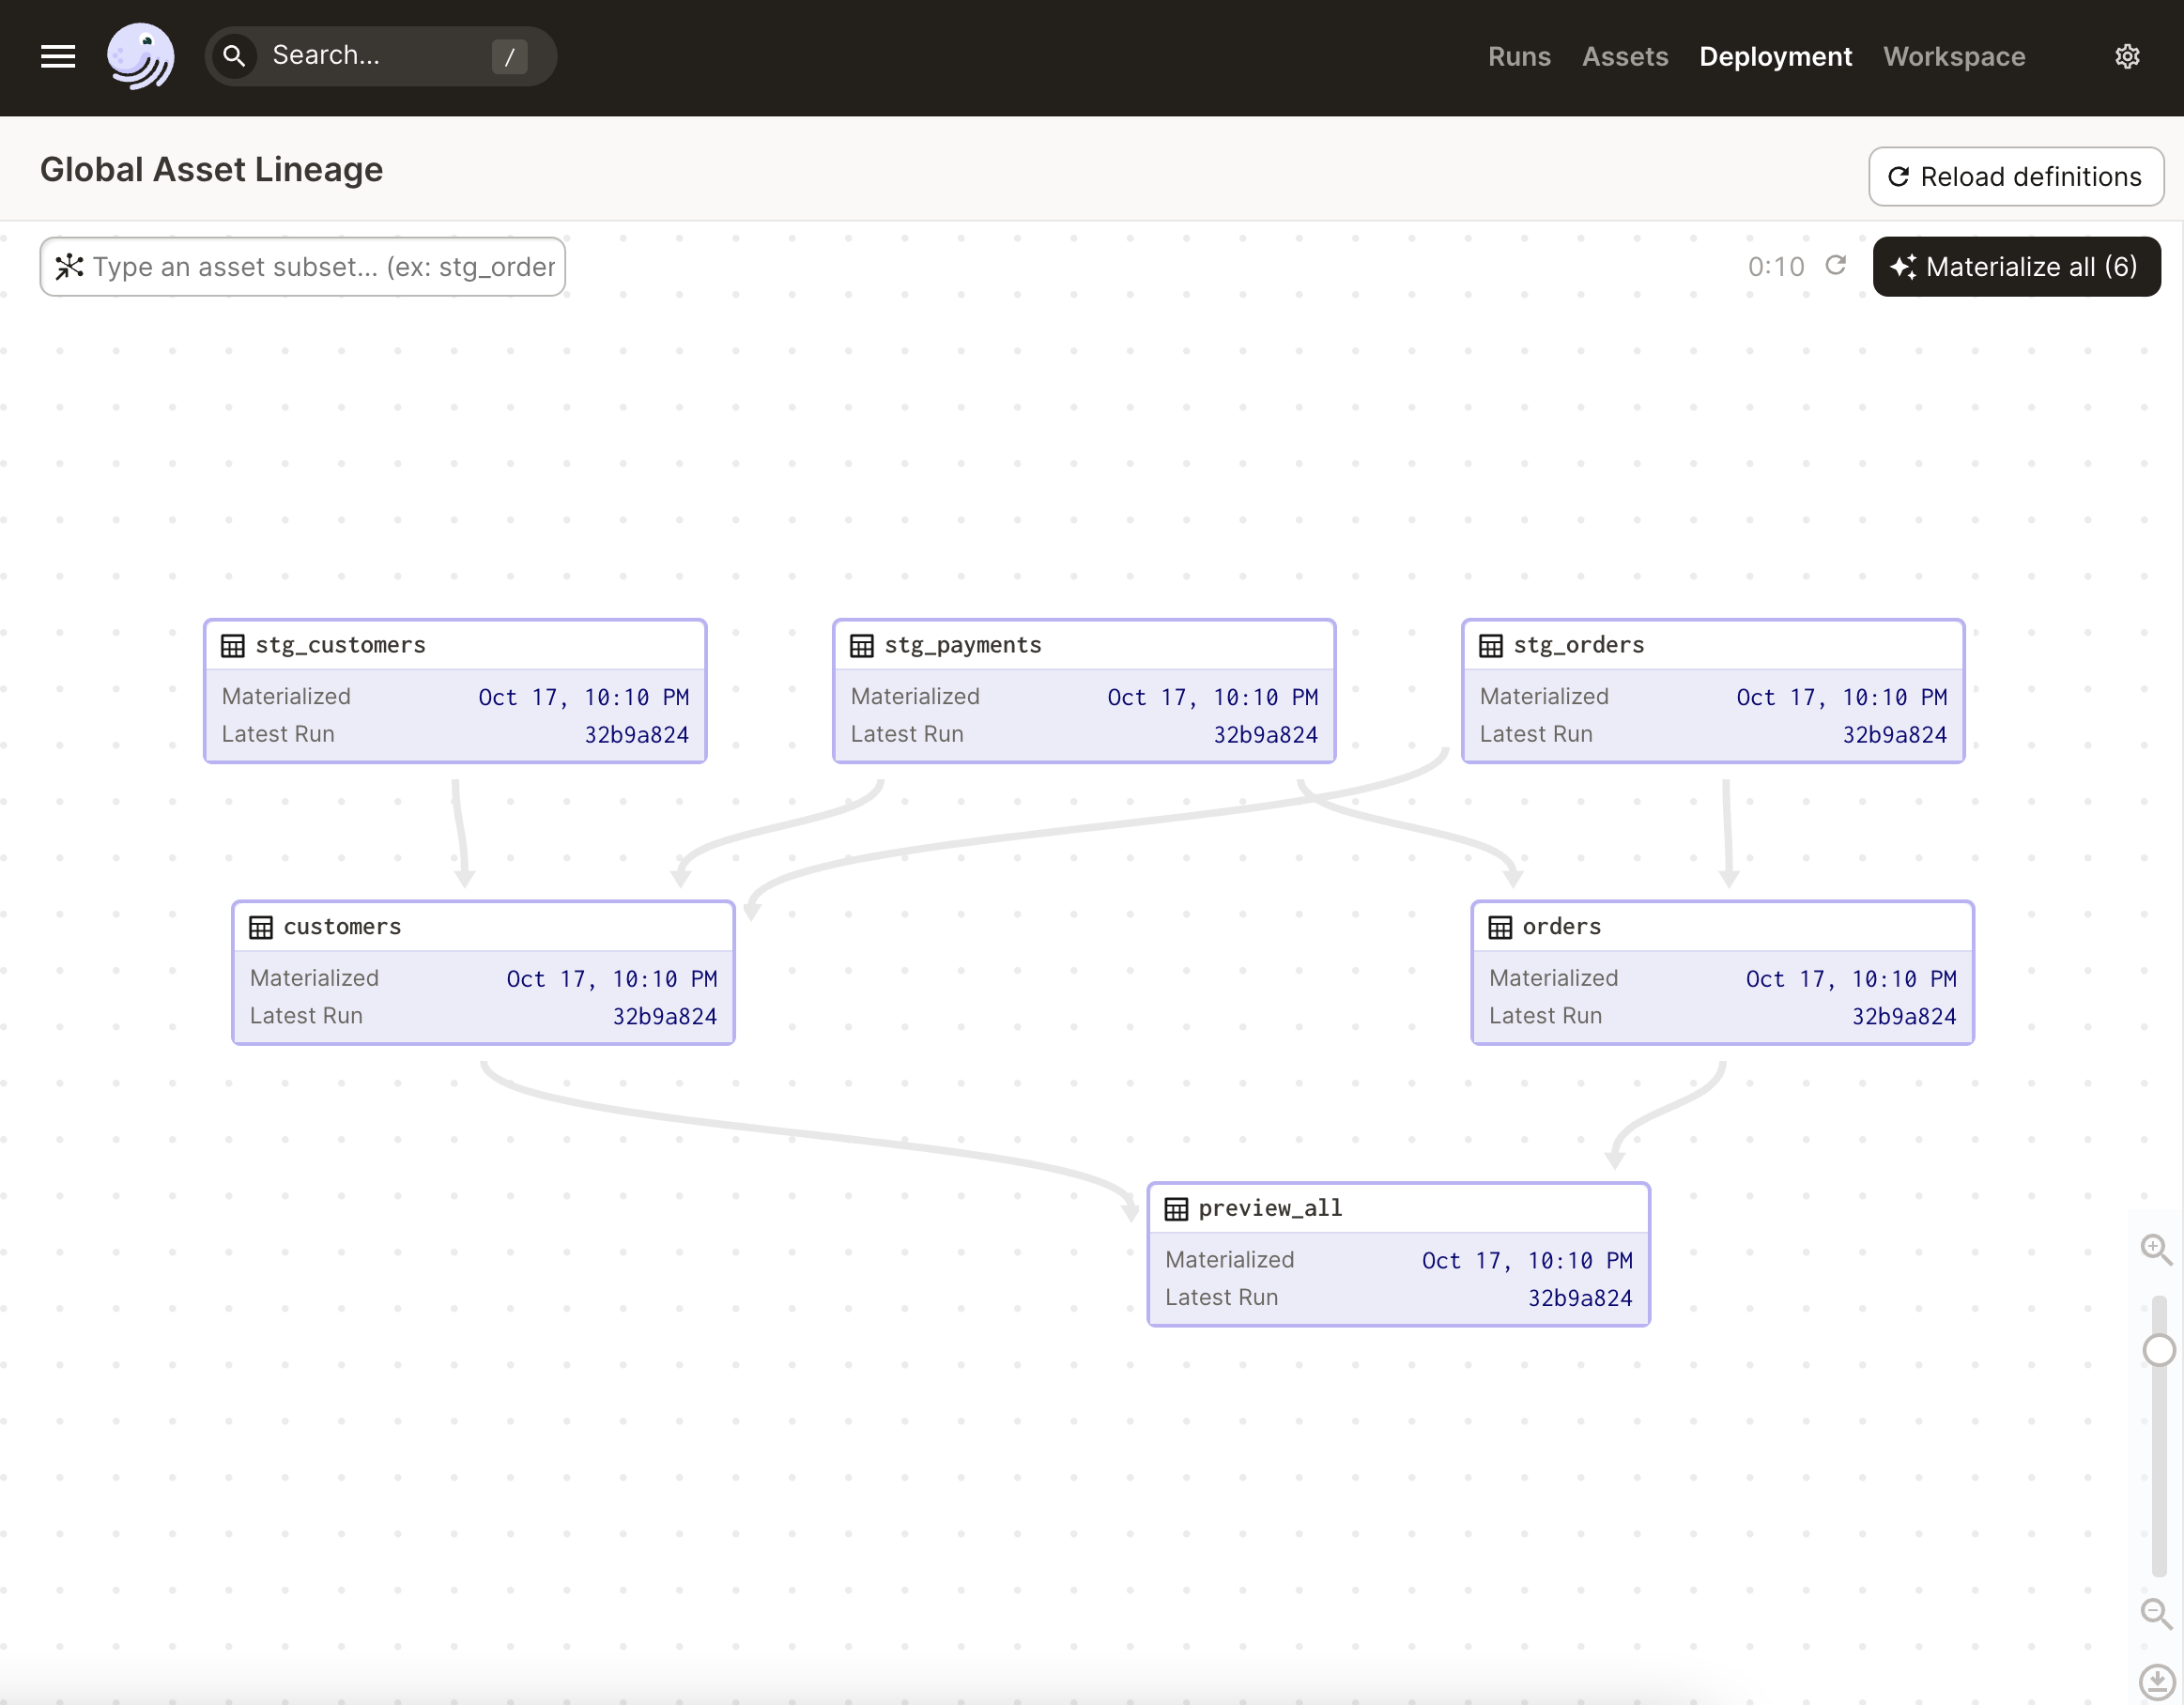 A snapshot of Dagster's UI showing the Global Asset Lineage graph